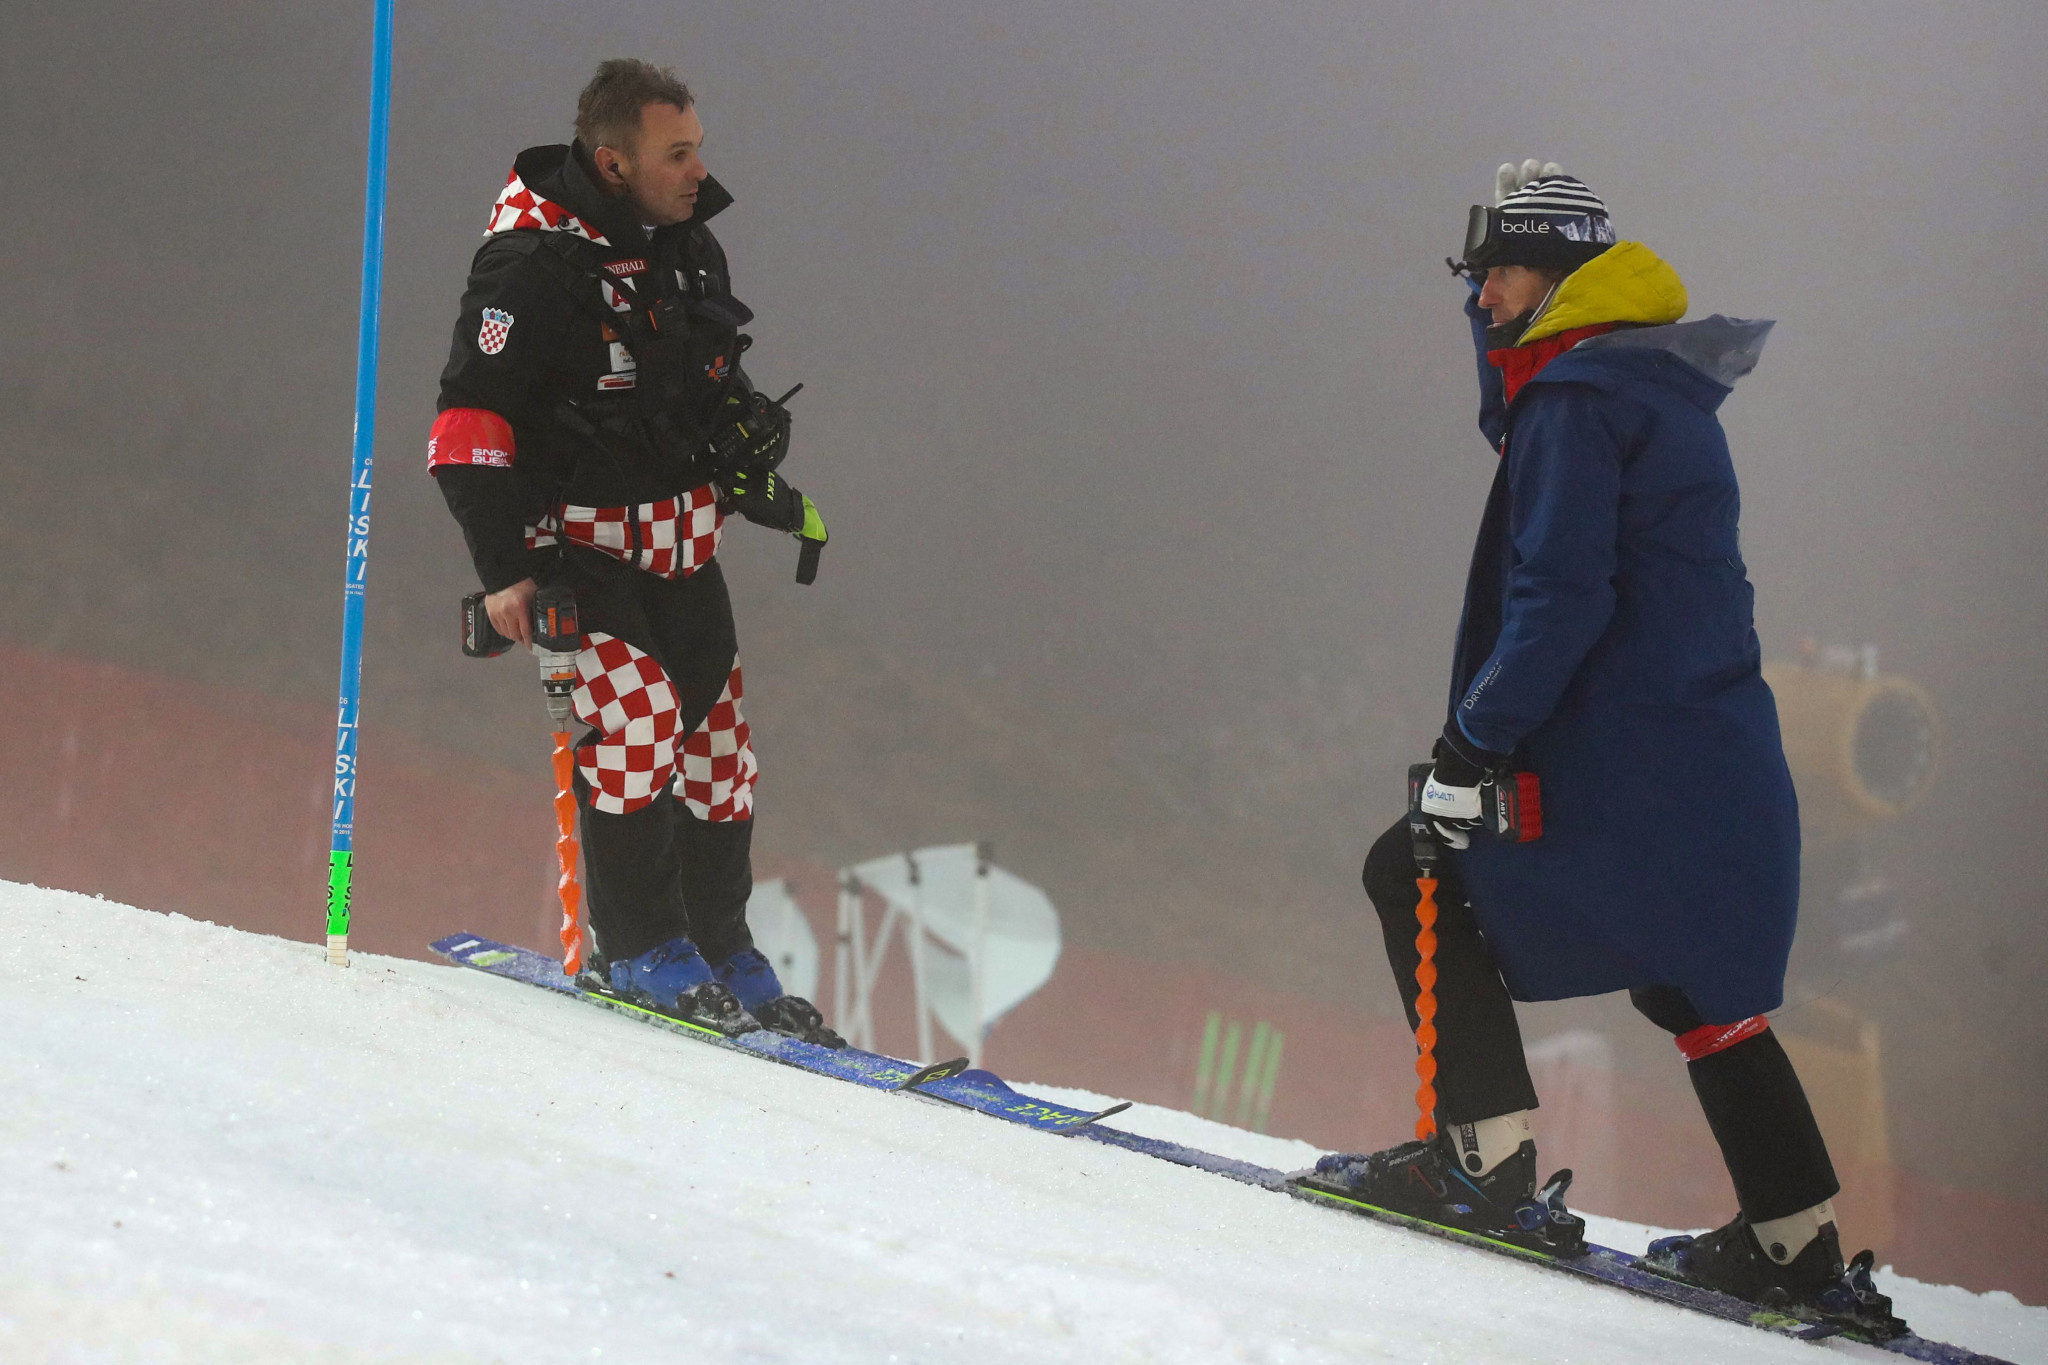 The men's Alpine Ski World Cup in Zagreb was eventually abandoned, but Markus Waldner said local organisers 